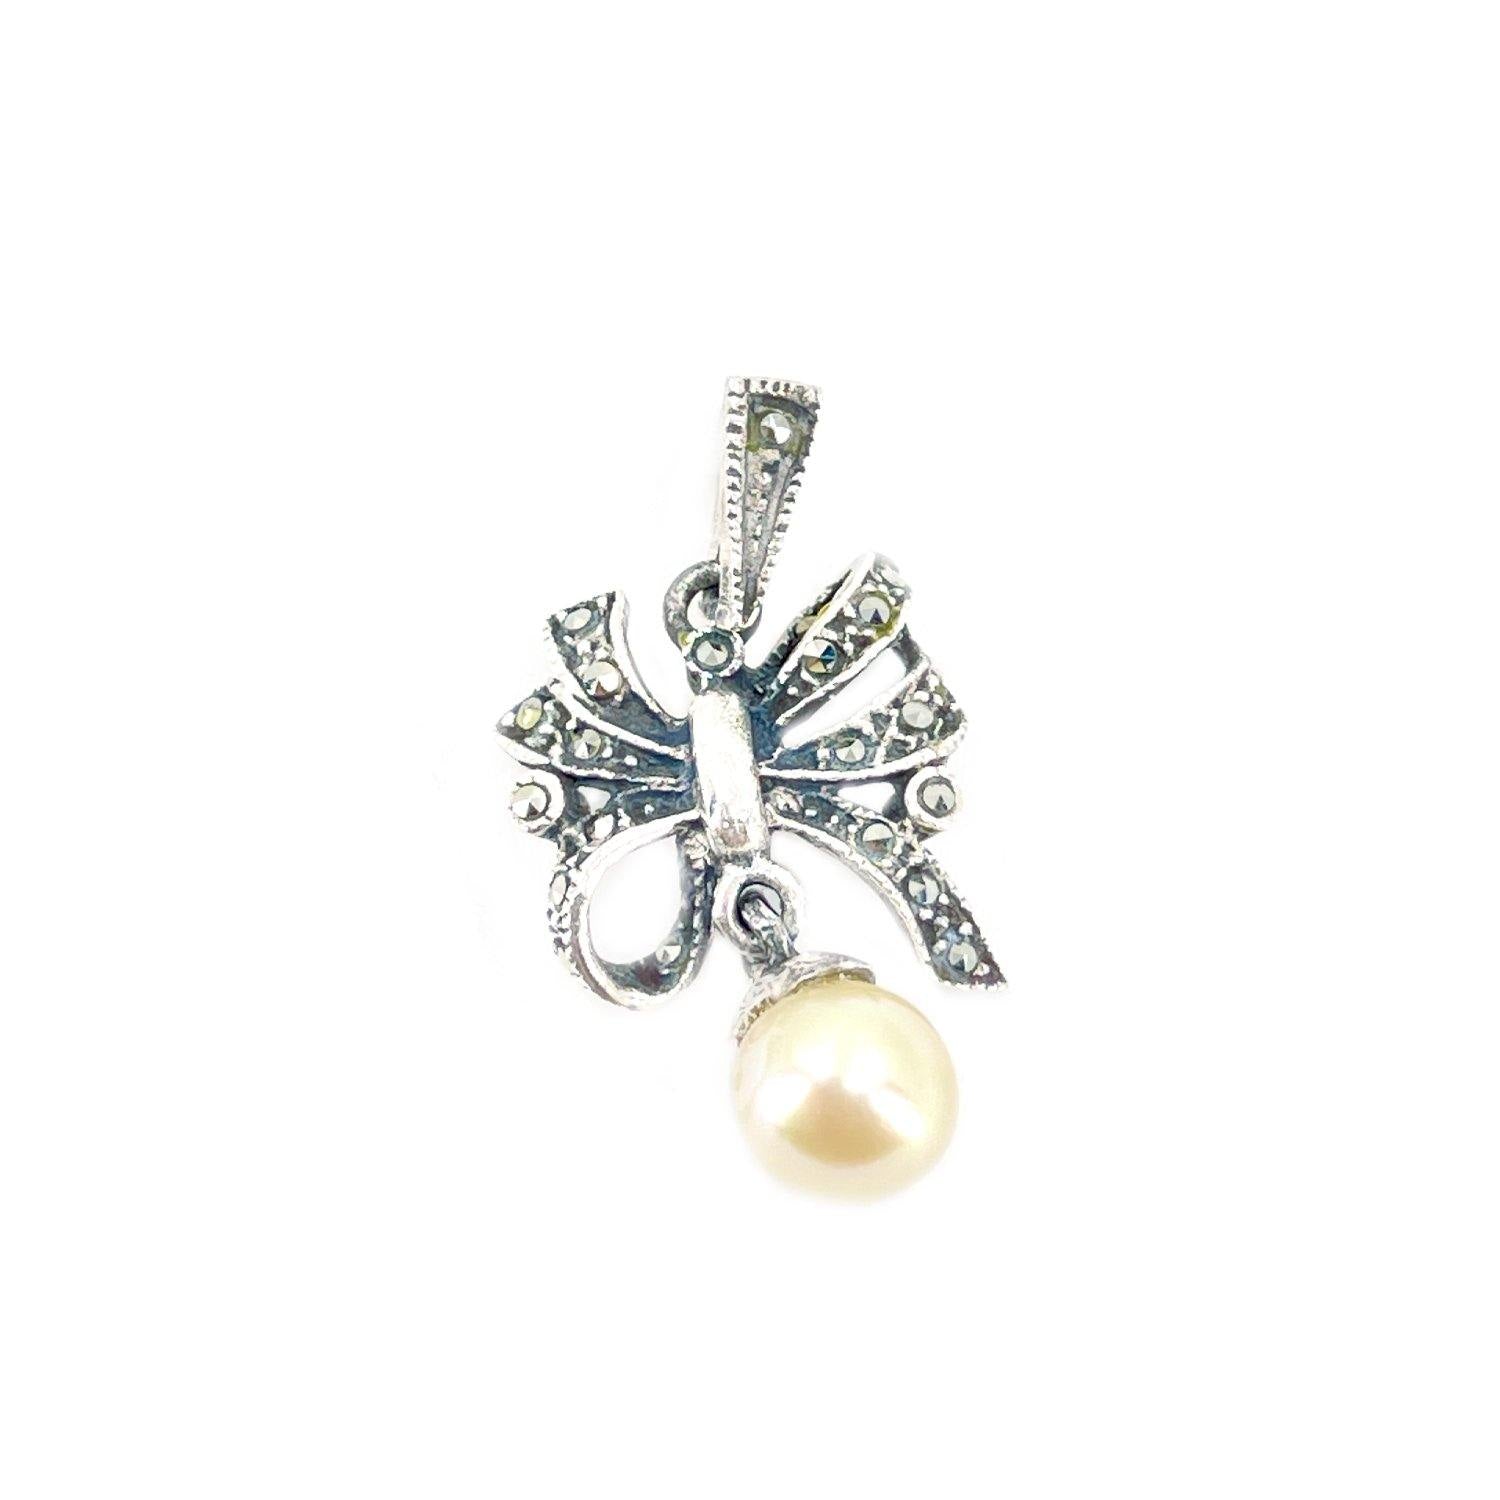 Marcasite Bow Japanese Saltwater Cultured Akoya Pearl Pendant Charm- Sterling Silver